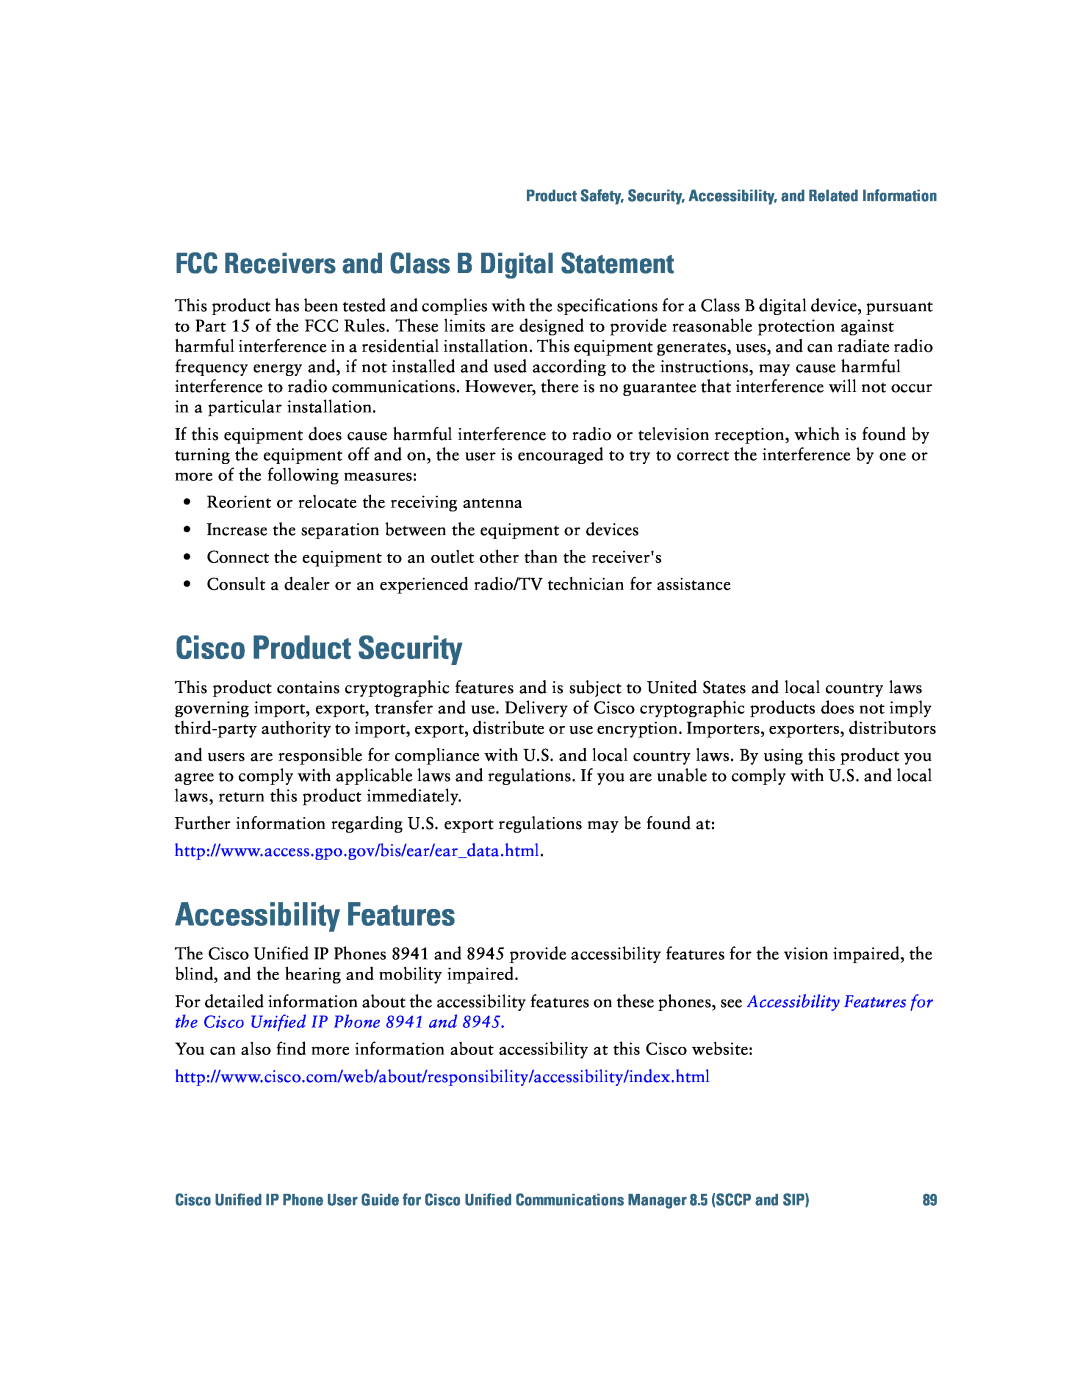 Cisco Systems IP Phone 8941 and 8945 manual Cisco Product Security, Accessibility Features 